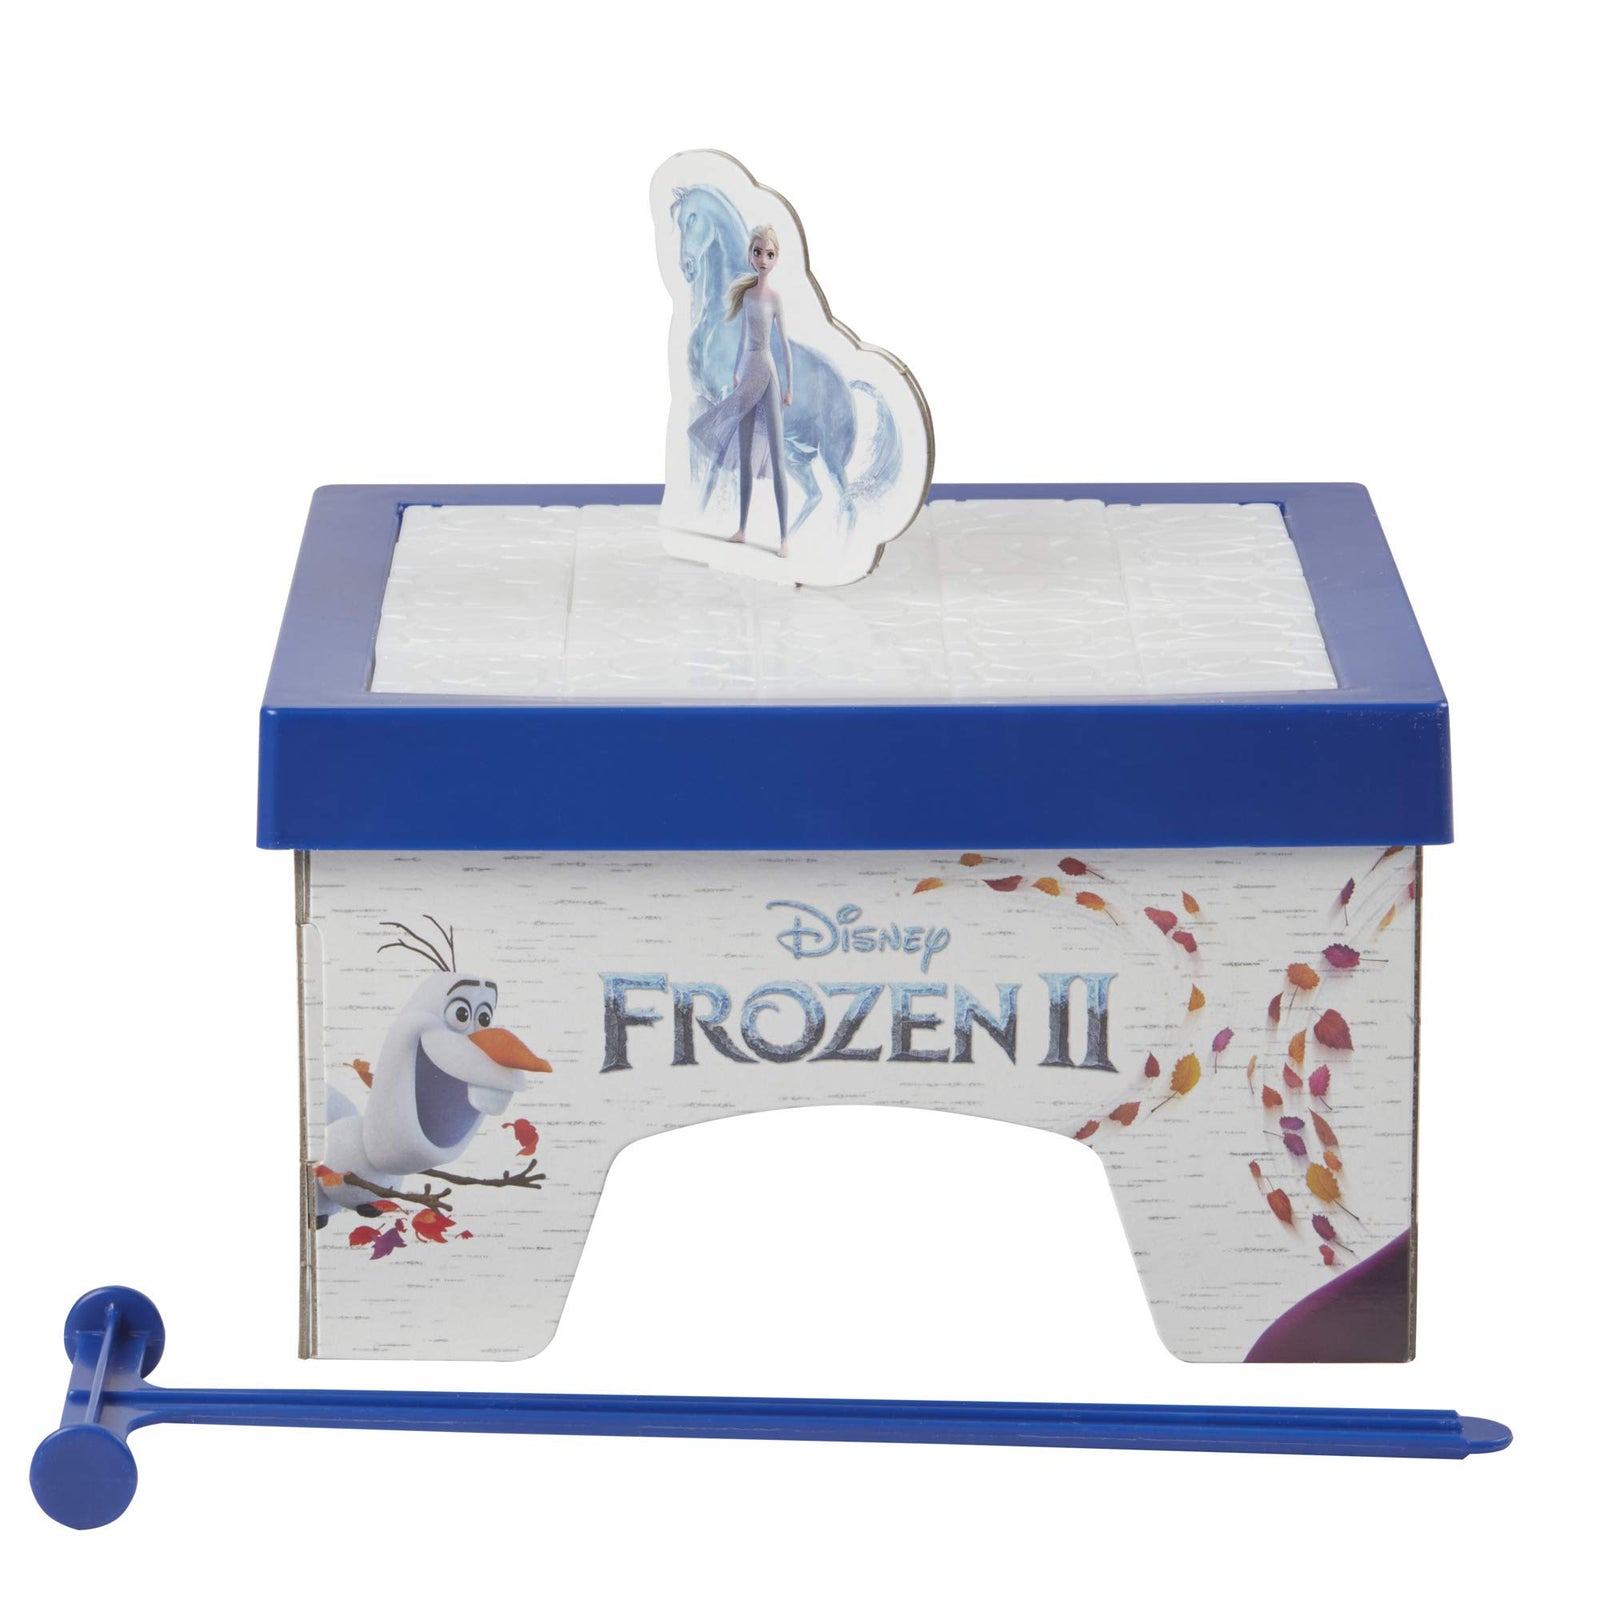 Hasbro Gaming Don't Break The Ice Disney Frozen 2 Edition Game for Kids Ages 3 and Up, Featuring Elsa and The Water Nokk (Amazon Exclusive)